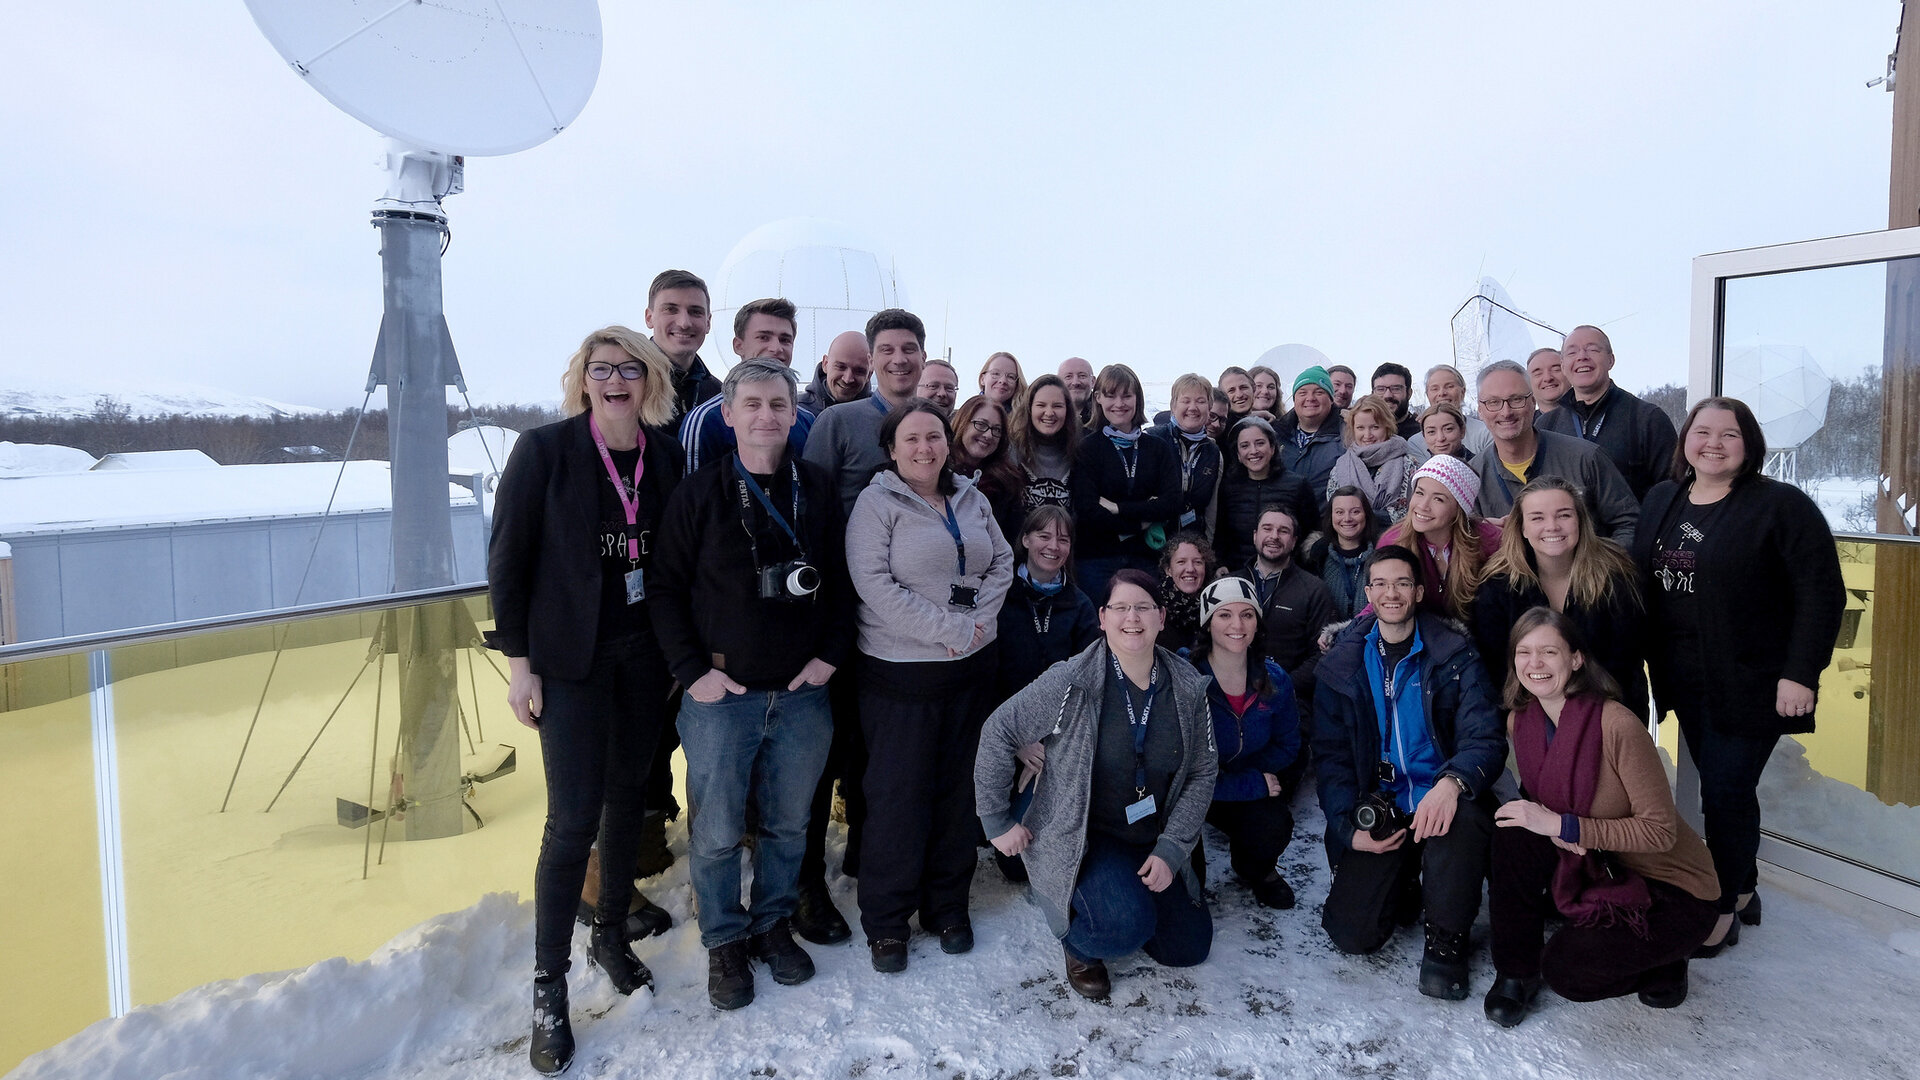 #AuroraHunters at the KSAT HQ balcony (just before a blizzard)